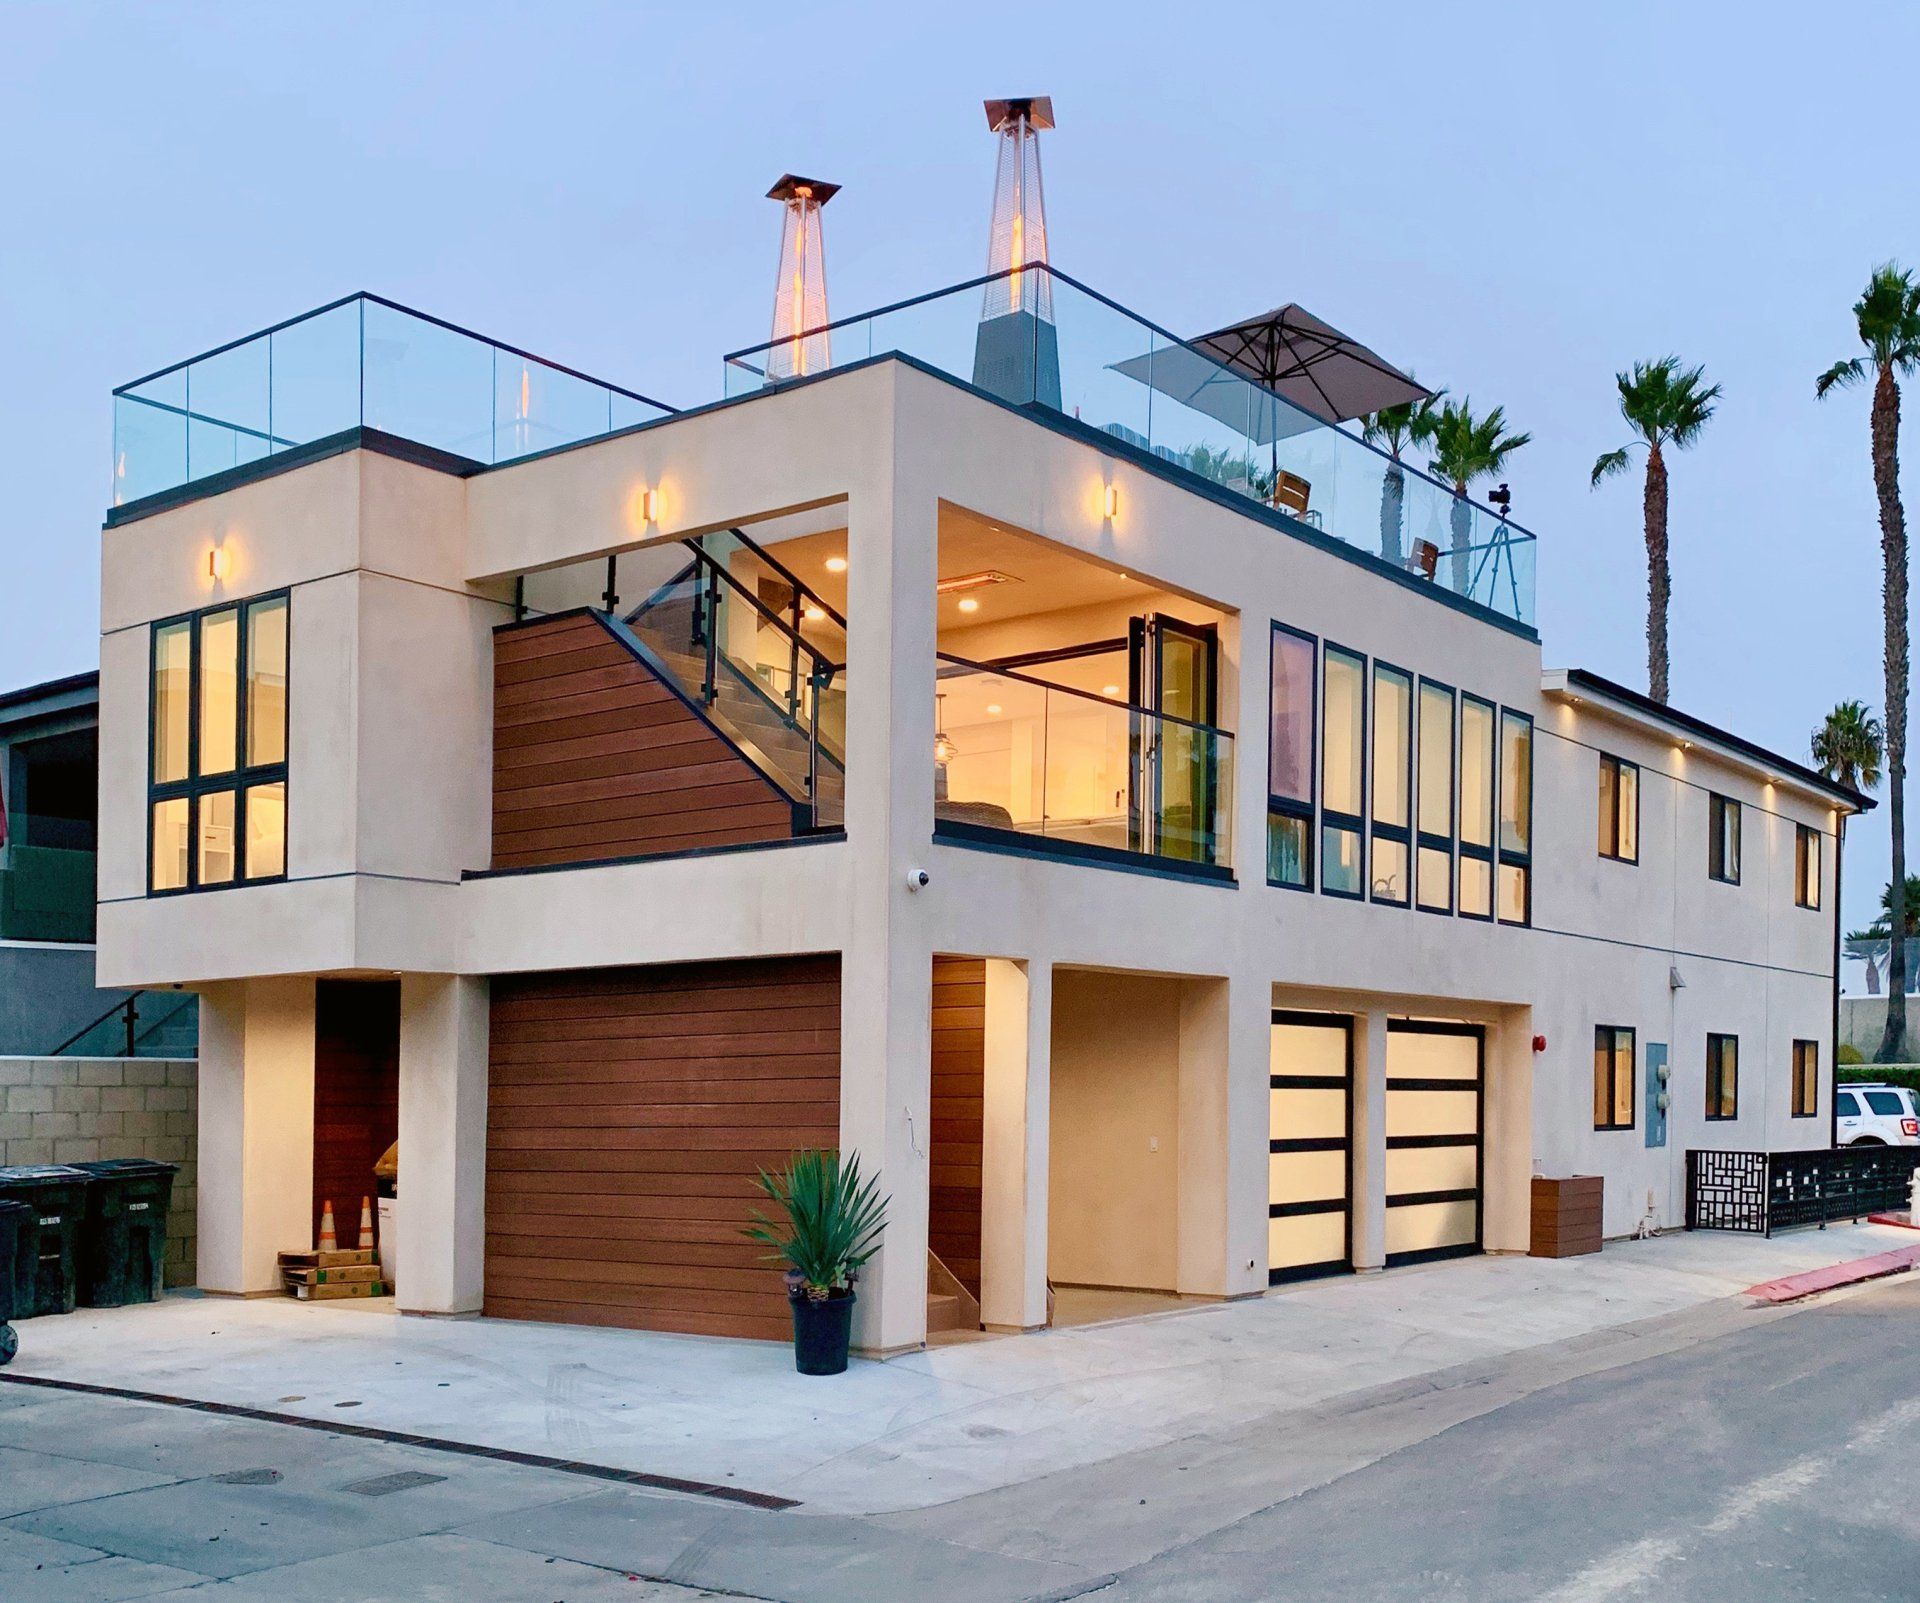 Exterior of a Newport Beach house designed by Oatman Architects